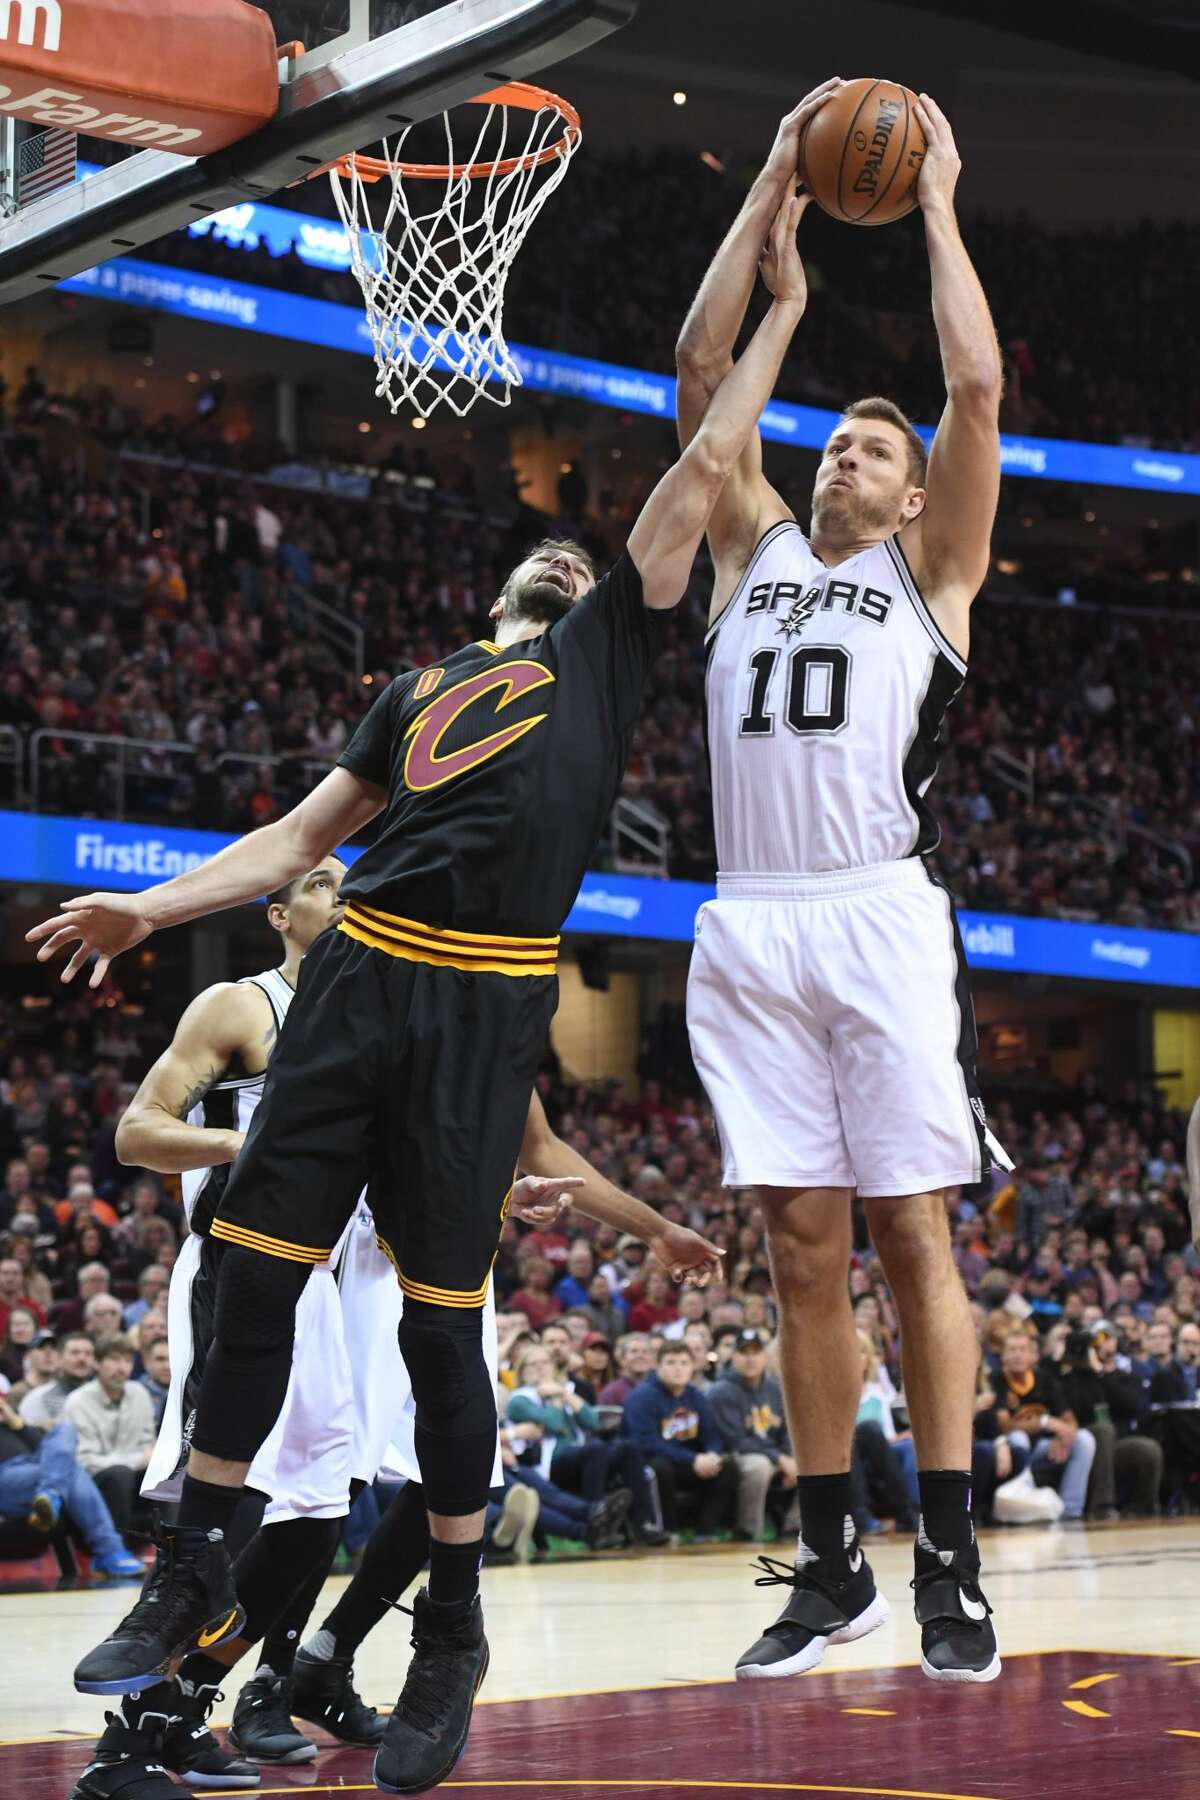 CLEVELAND, OH - JANUARY 21: David Lee #10 of the San Antonio Spurs grabs a rebound over Kevin Love #0 of the Cleveland Cavaliers during the first half at Quicken Loans Arena on January 21, 2017 in Cleveland, Ohio. NOTE TO USER: User expressly acknowledges and agrees that, by downloading and/or using this photograph, user is consenting to the terms and conditions of the Getty Images License Agreement. Mandatory copyright notice. (Photo by Jason Miller/Getty Images)